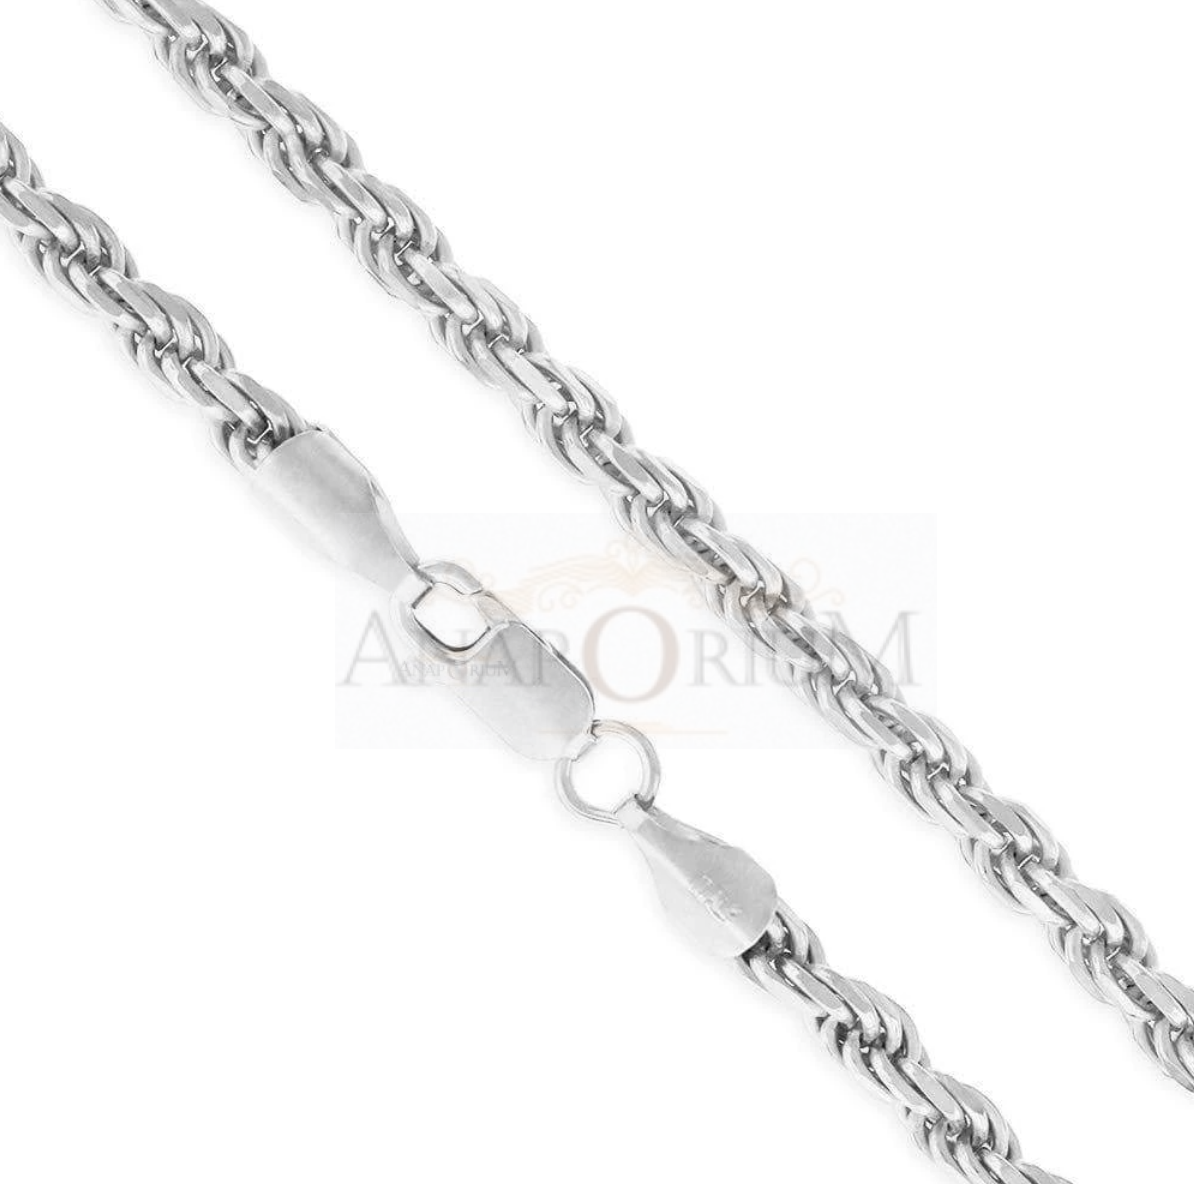 .925 Sterling Silver 2mm Italian Rope Chain Necklace in Lengths 16-30